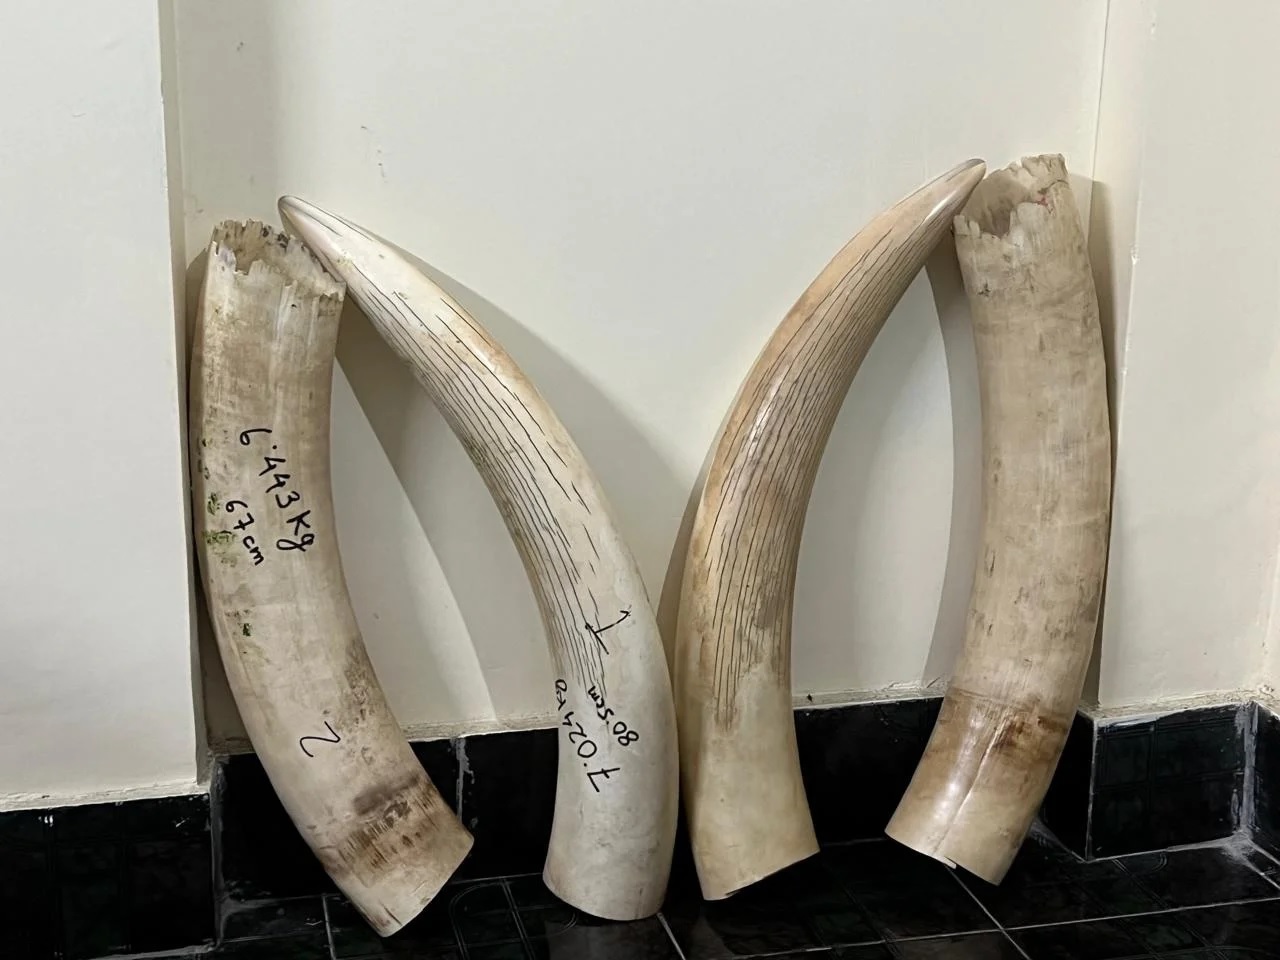 Customs seizes 27.992kgs of Elephant tusks (ivory) on May 29, 1 apprehended